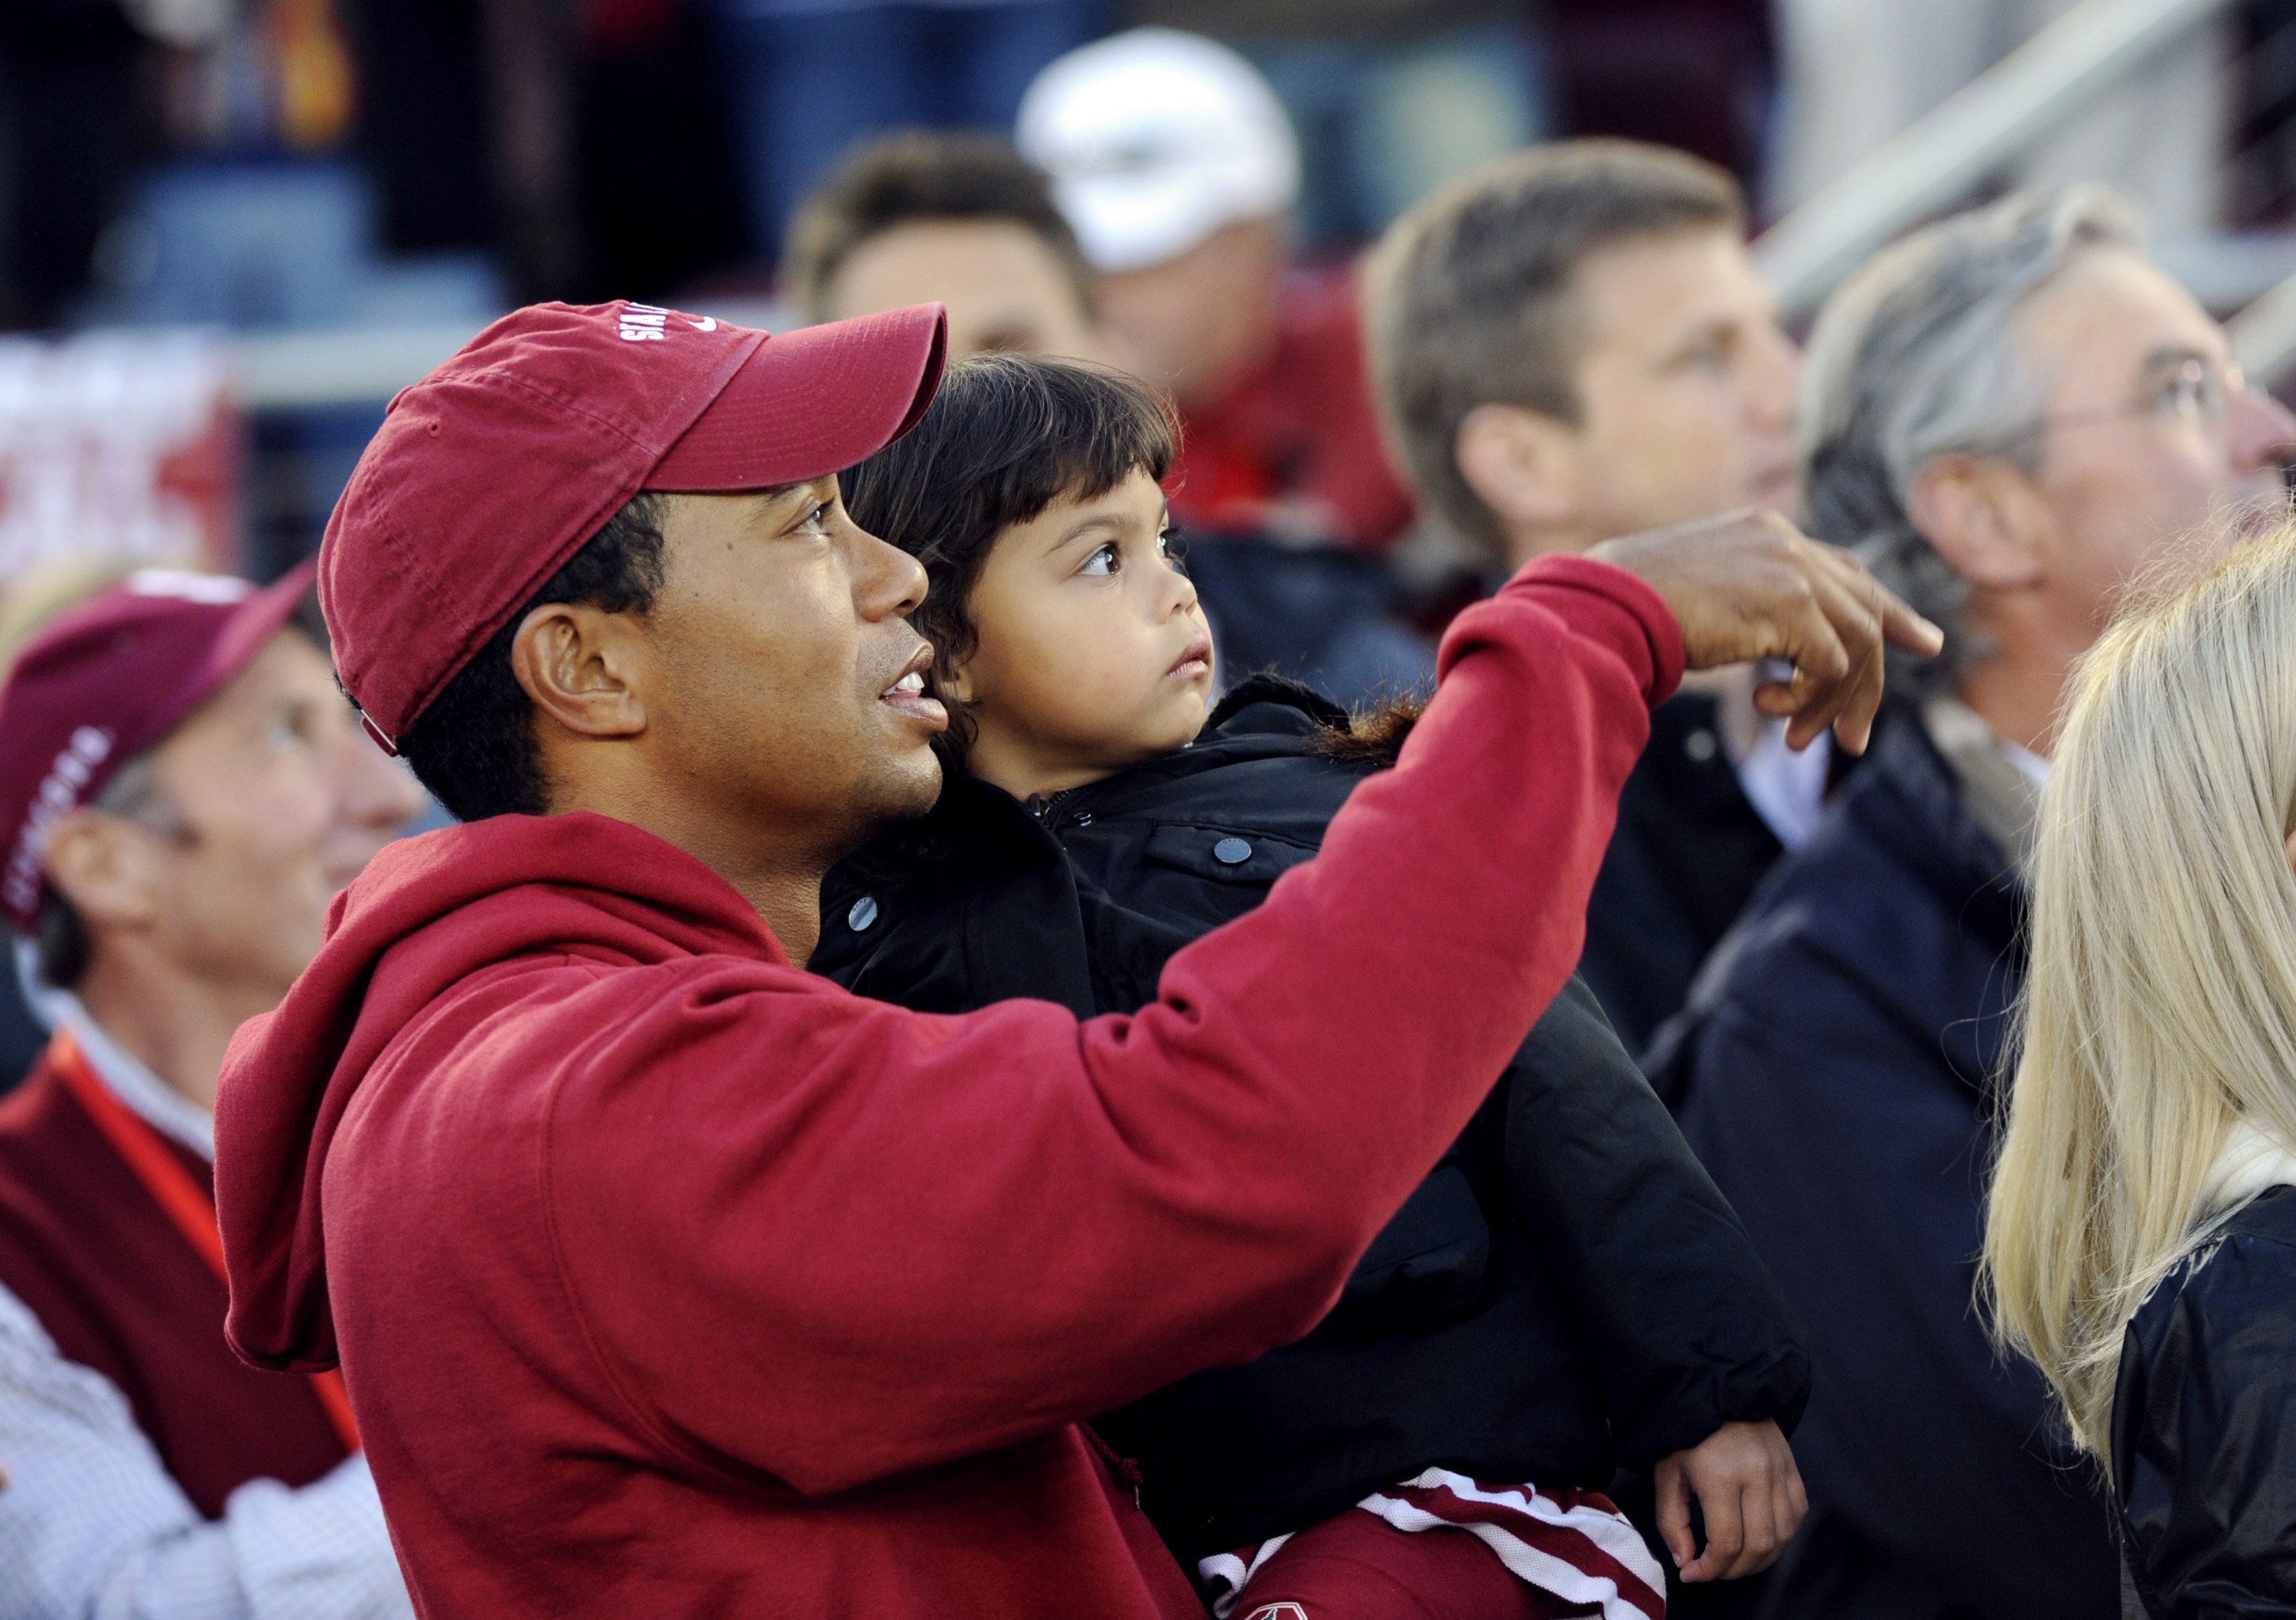 Tiger Woods and his daughter Sam Alexis Woods watch pre-game fly over between the California Bears and the Stanford Cardinals NCAA football game at Stanford Stadium, Stanford, California. | Source: Getty Images